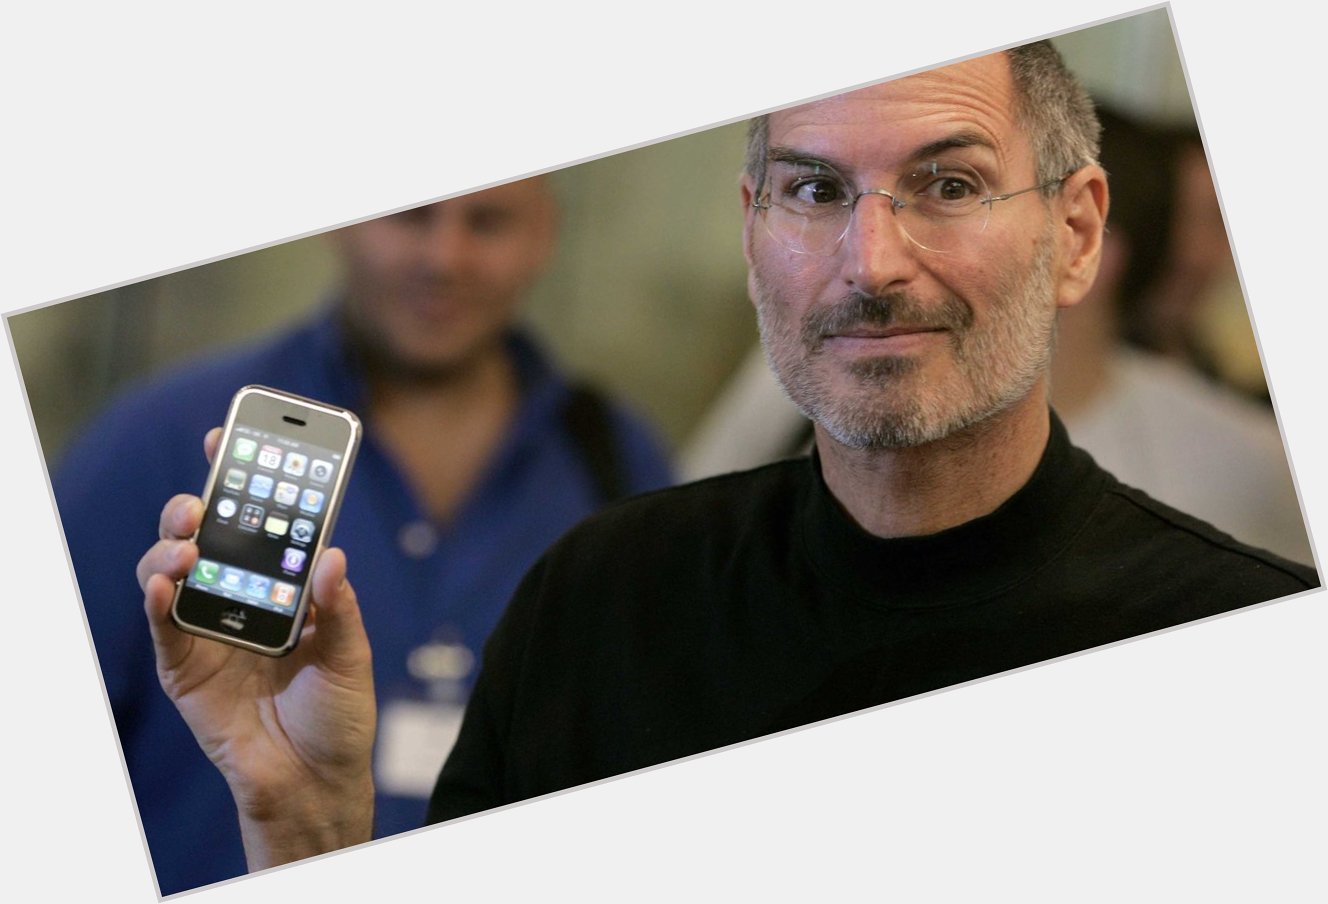 Happy 60th Birthday to Steve Jobs, The man who changed how we think of phones completely. 